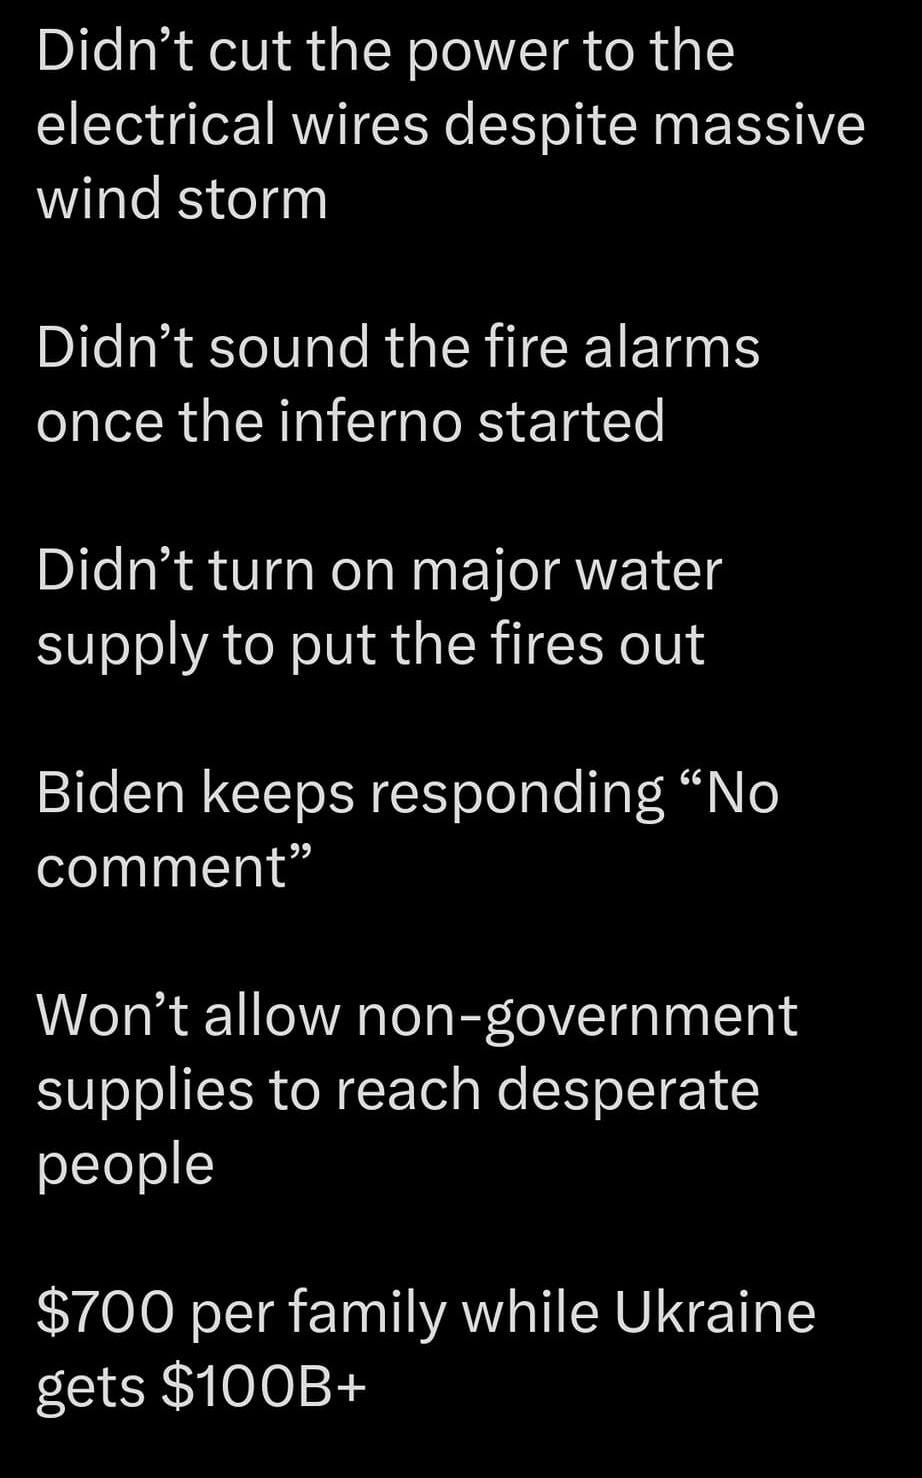 May be an image of text that says '4G 100% Post Didn't cut the power to the electrical wires despite massive wind storm Didn't sound the fire alarms once the inferno started Didn't turn on major water supply to put the fires out Biden keeps responding "No comment" Won't allow non-government supplies to reach desperate people $700 per family while Ukraine gets $100B+ Post your'